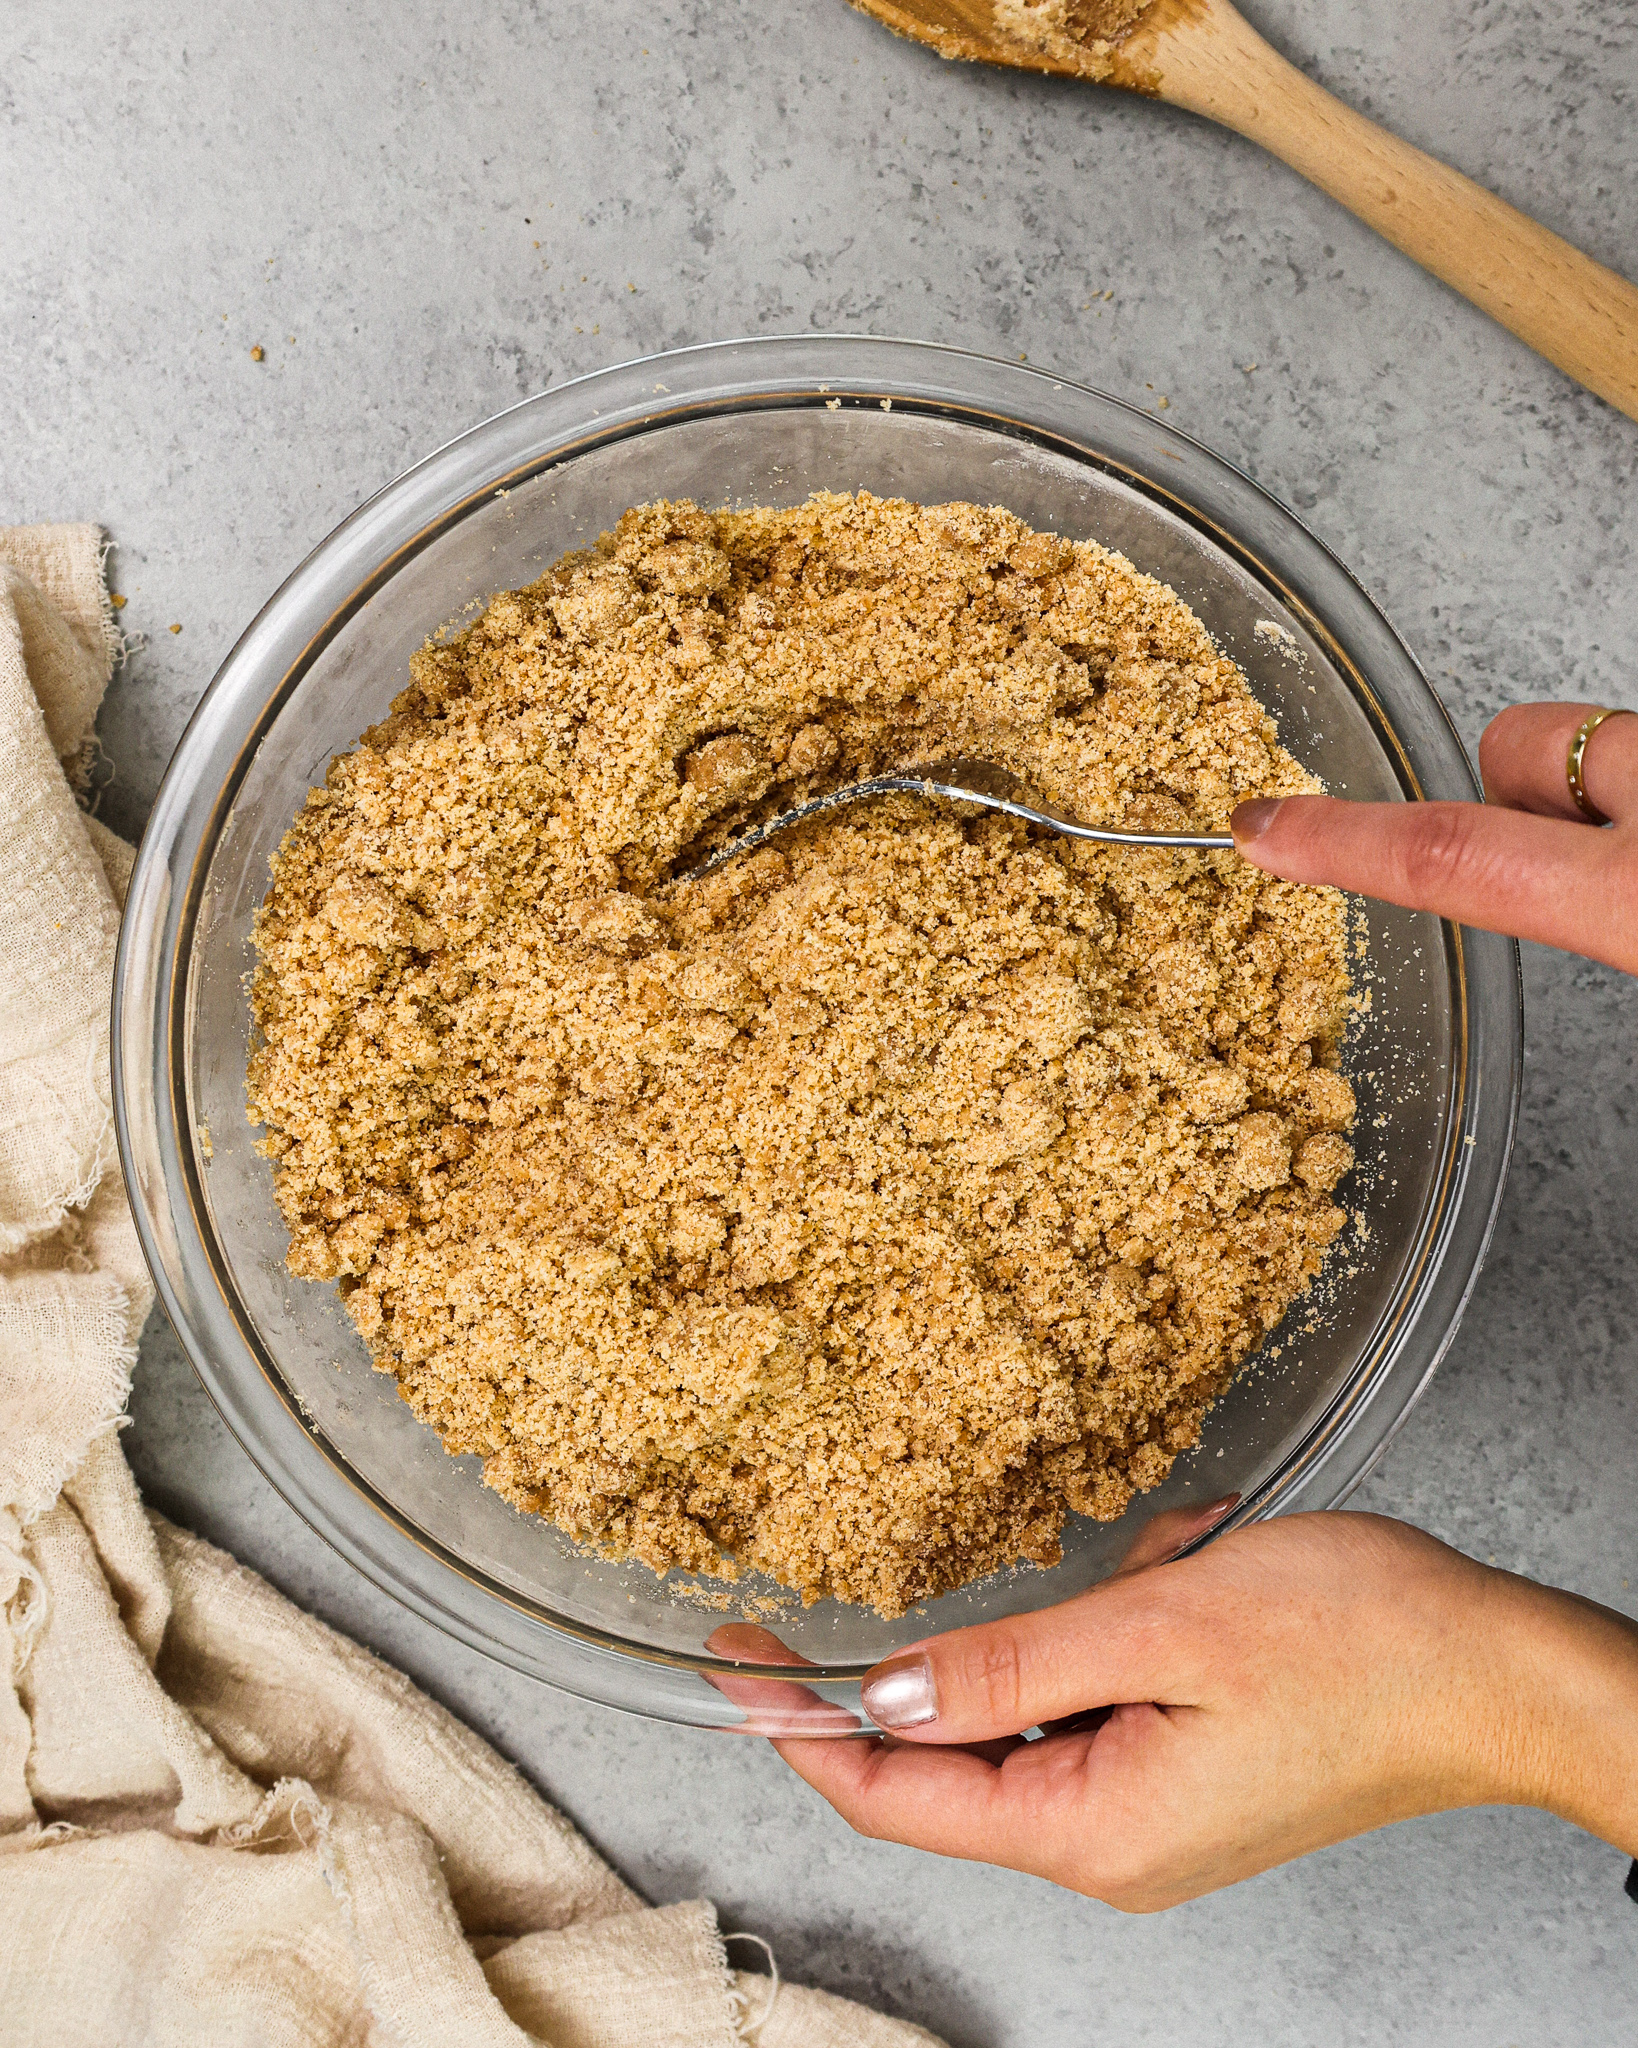 image of cinnamon streusel topping being mixed in a class bowl